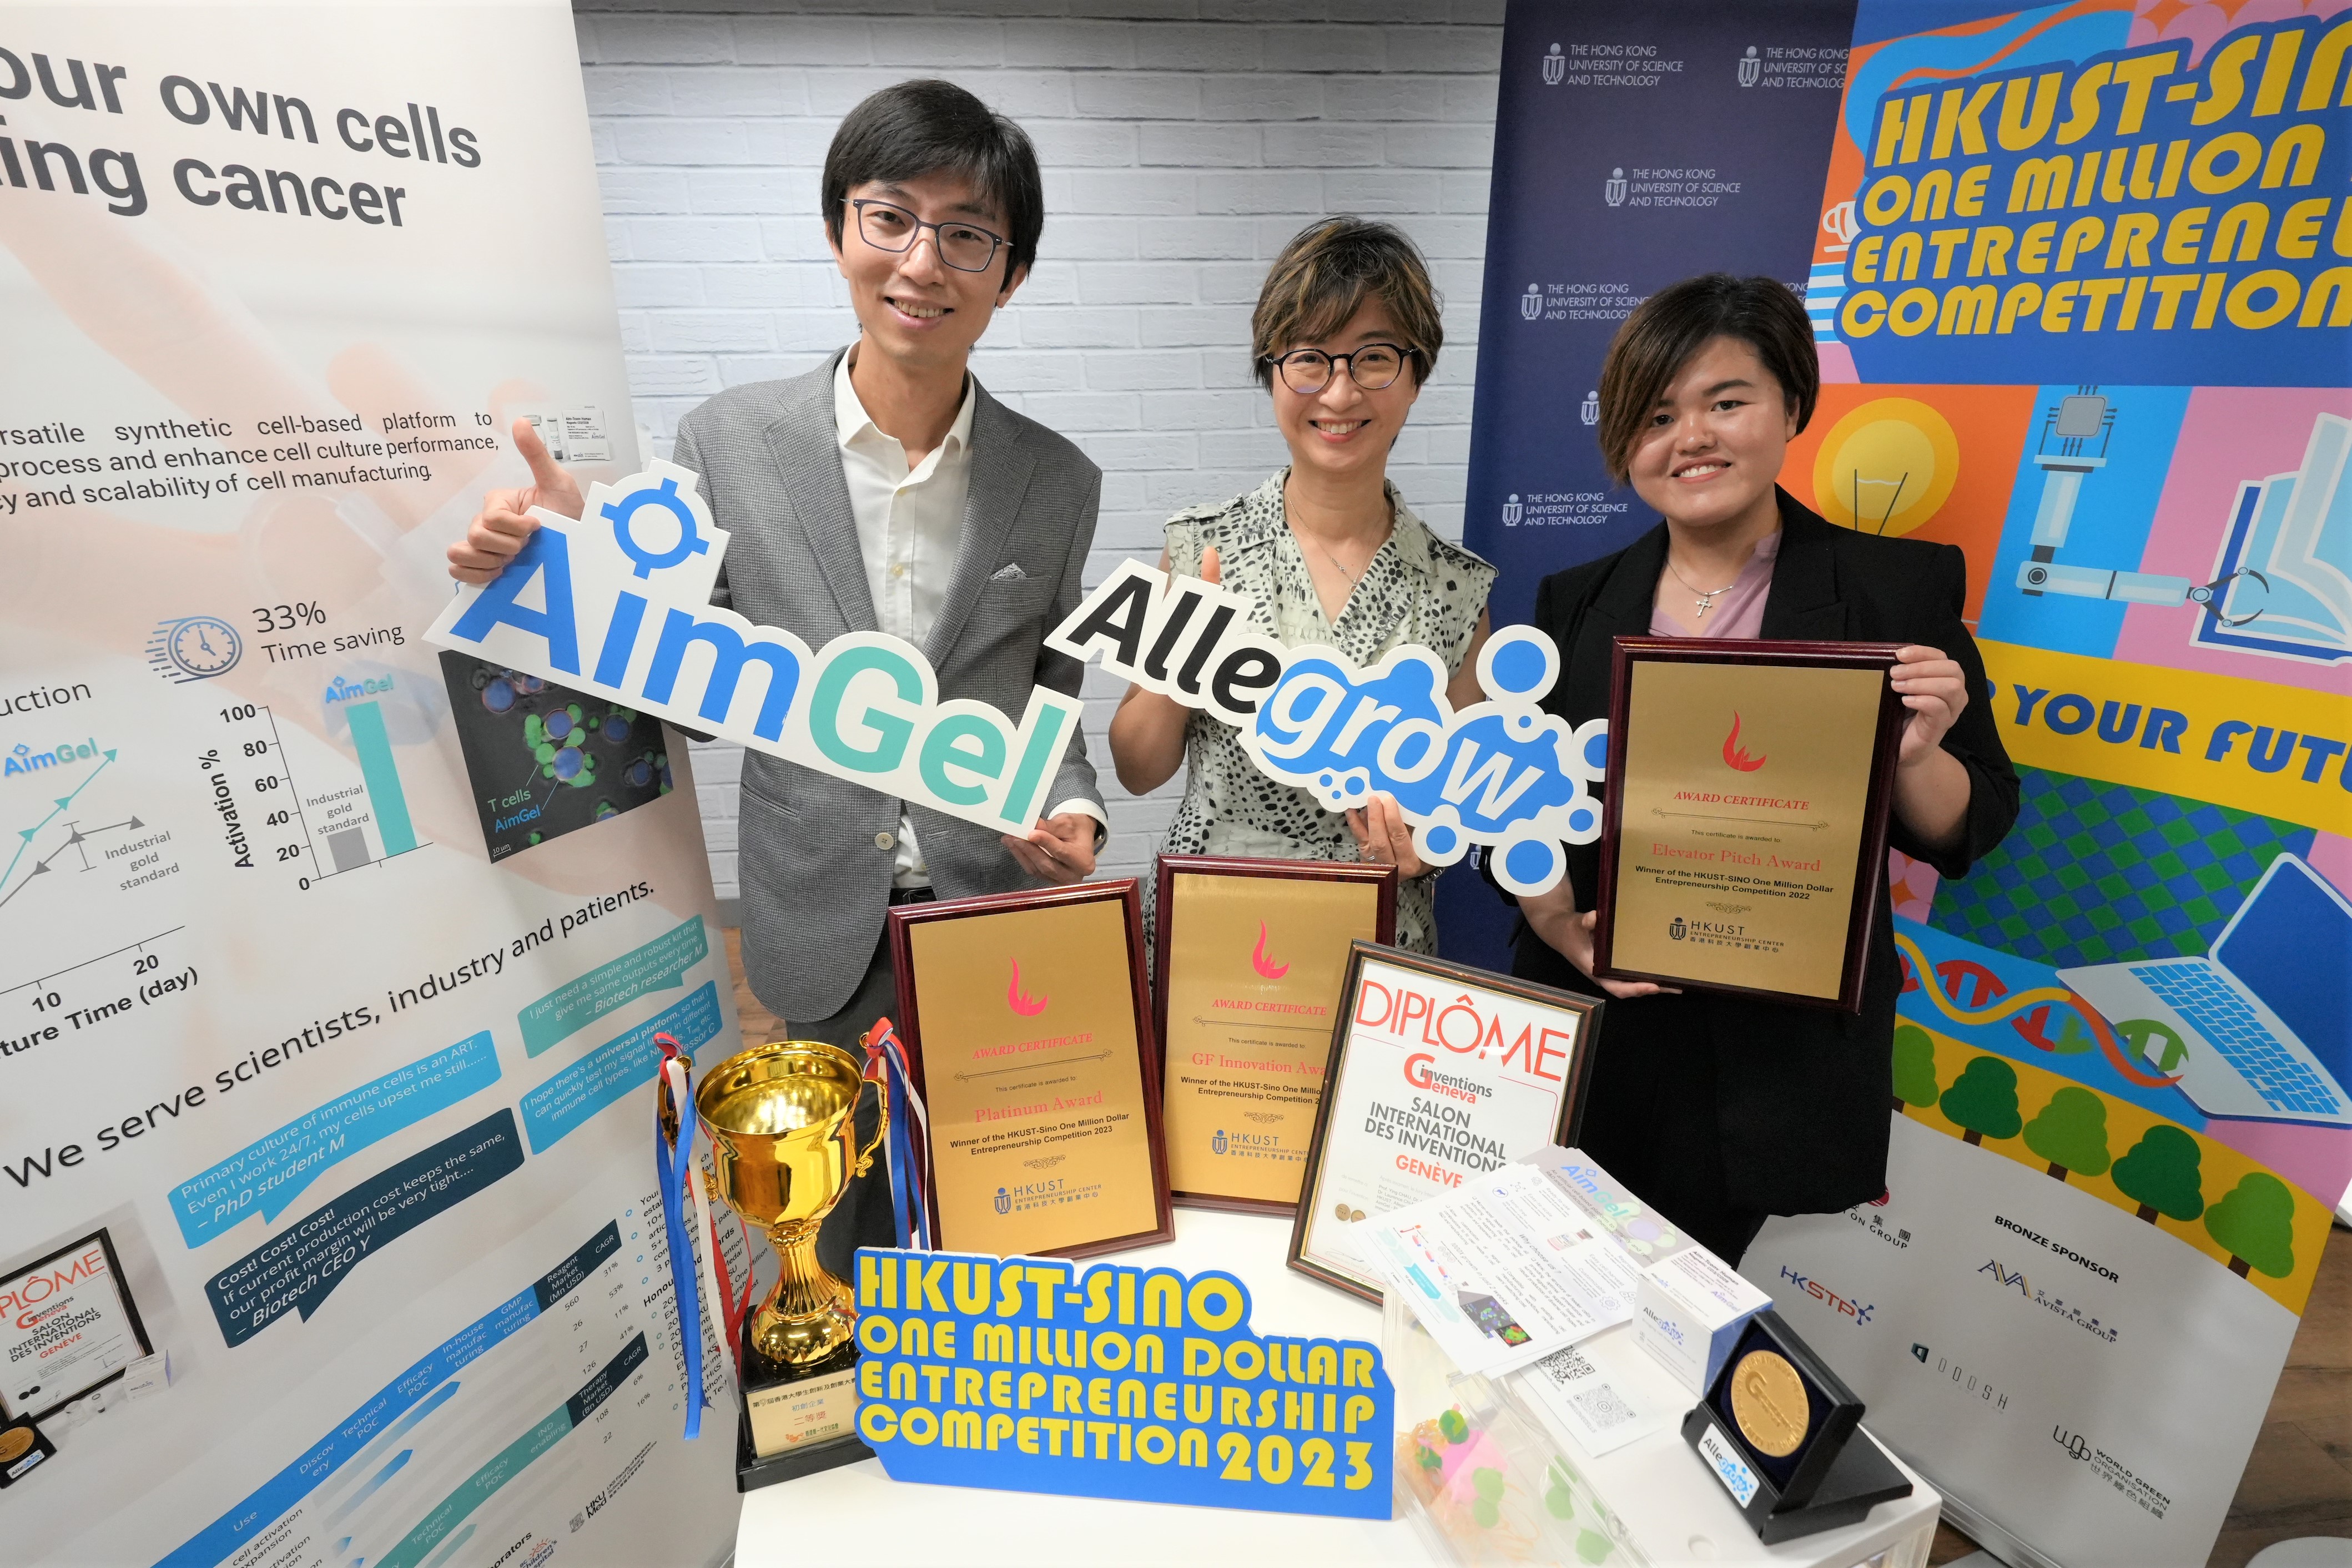 Melody with her life mentors Prof. Chau (center) and Laurence (left) after winning the HKUST-Sino 1M Entrepreneurship Competition.